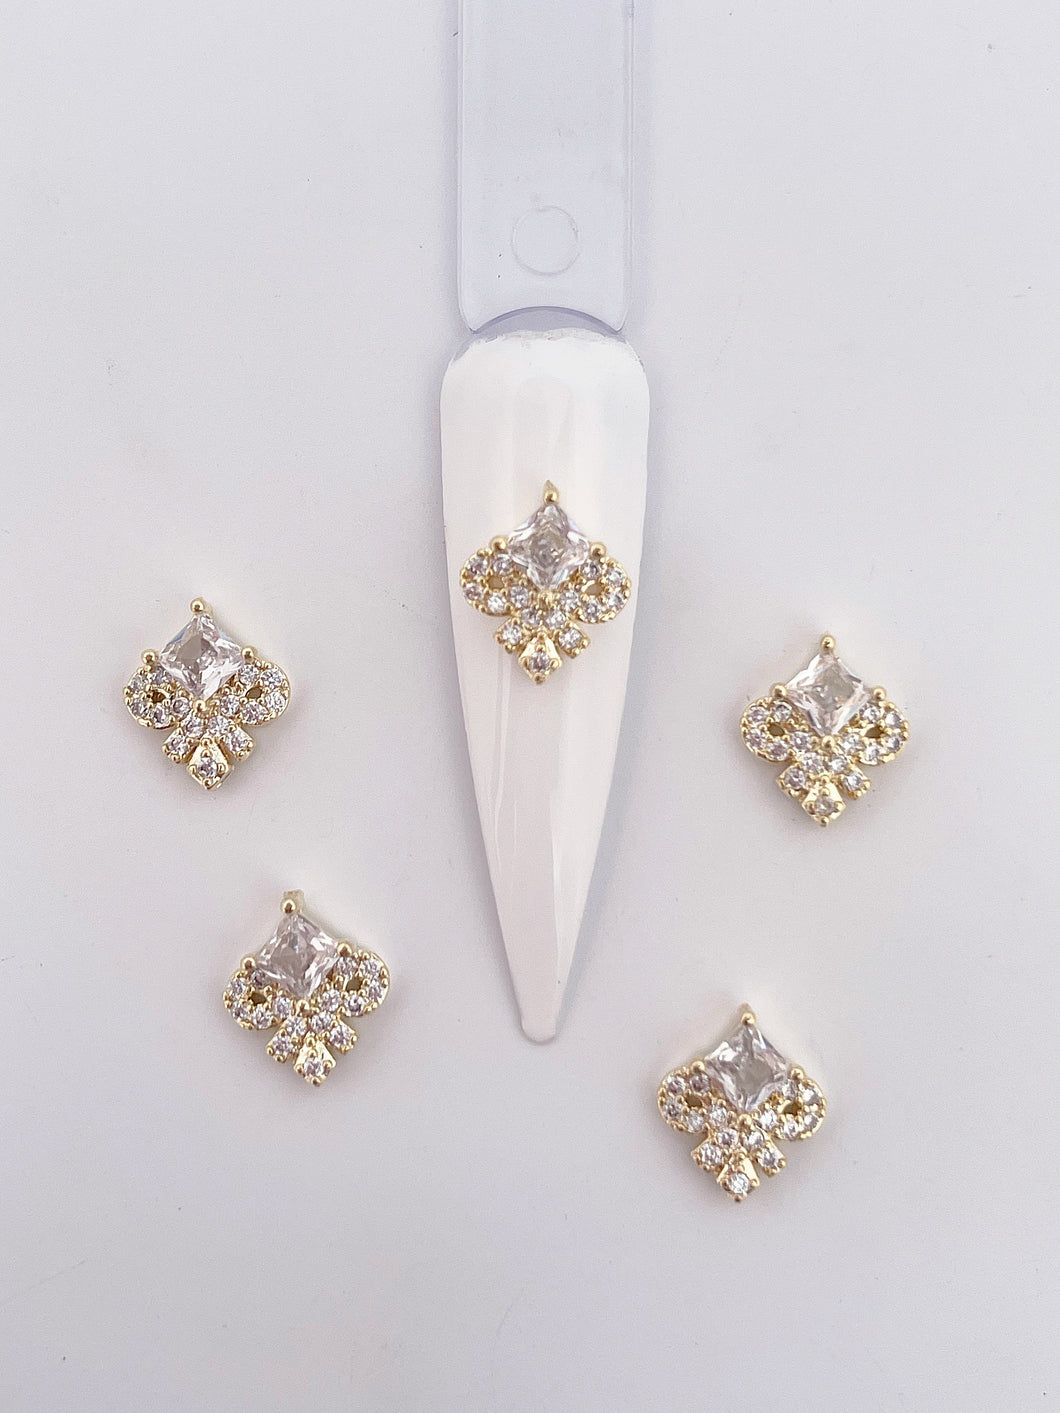 3D Zircon Nail Charms #45 (5 Pieces)